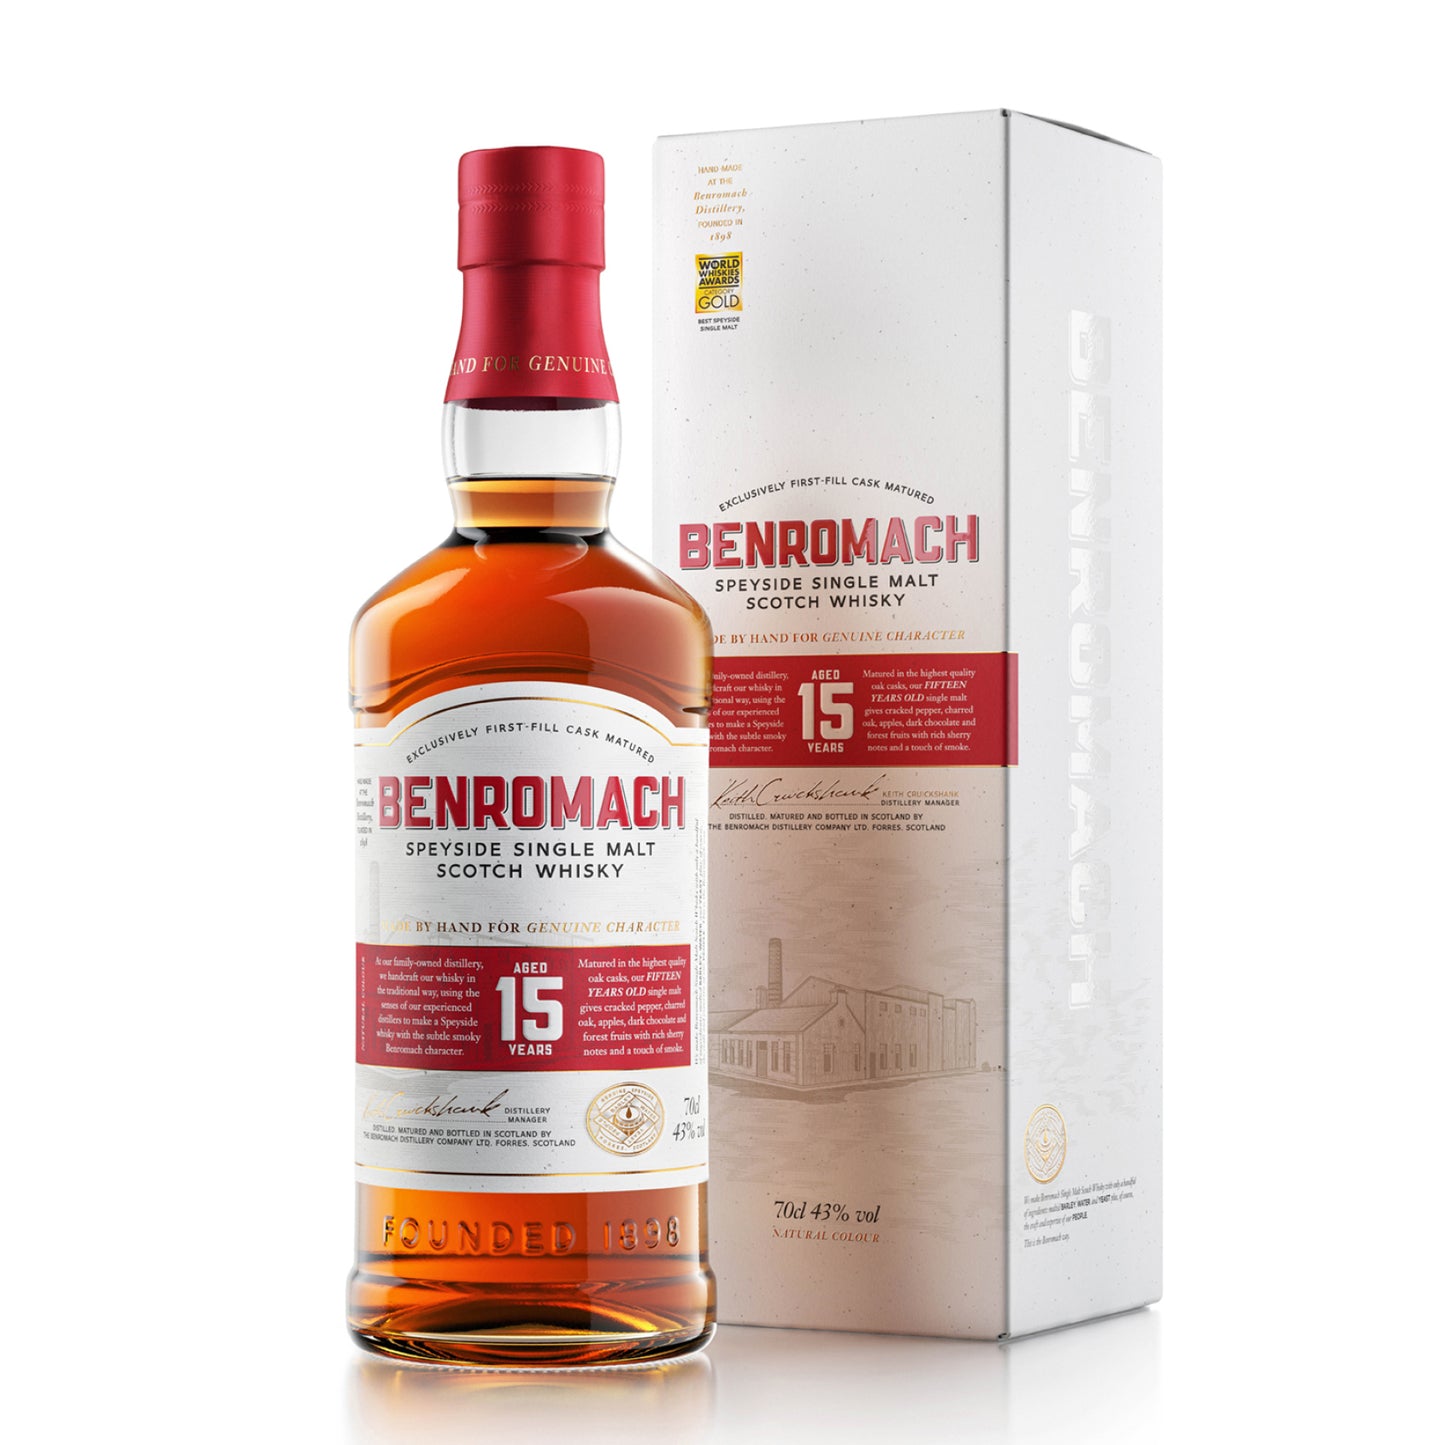 BENROMACH 15 YEAR OLD